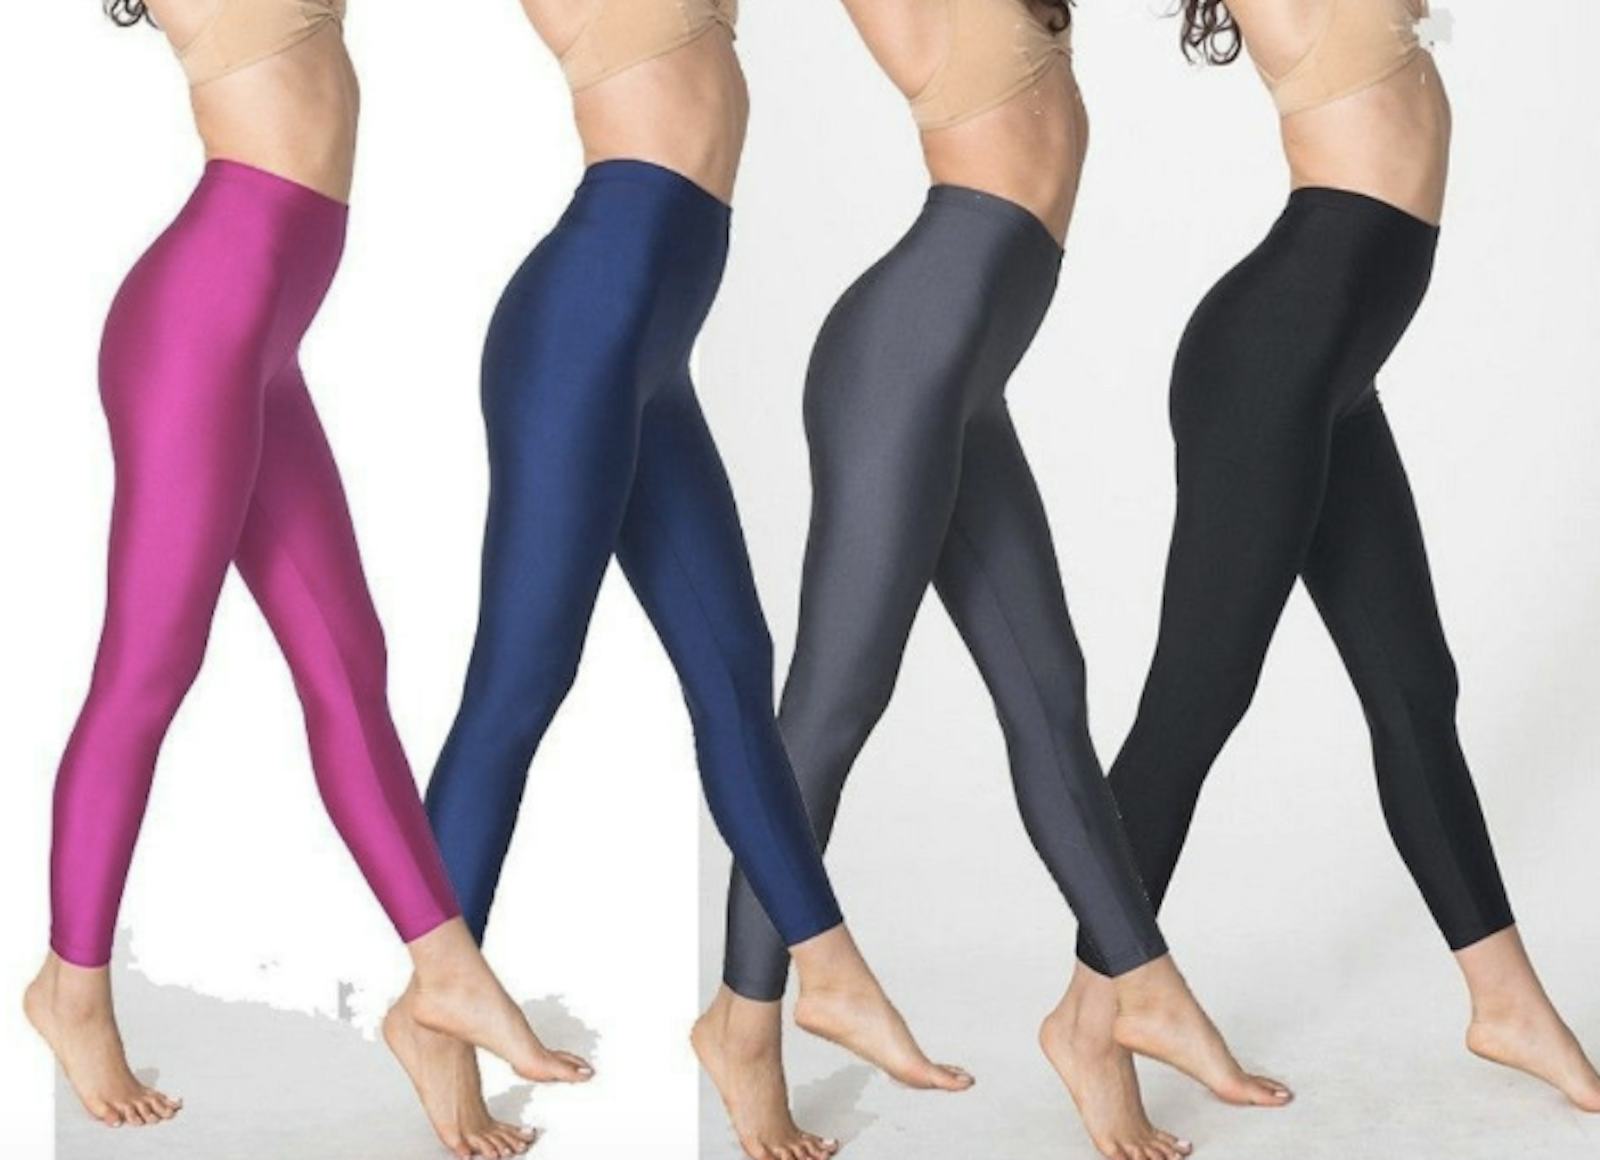 History of Capri leggings: When were they first introduced?, by FITOP